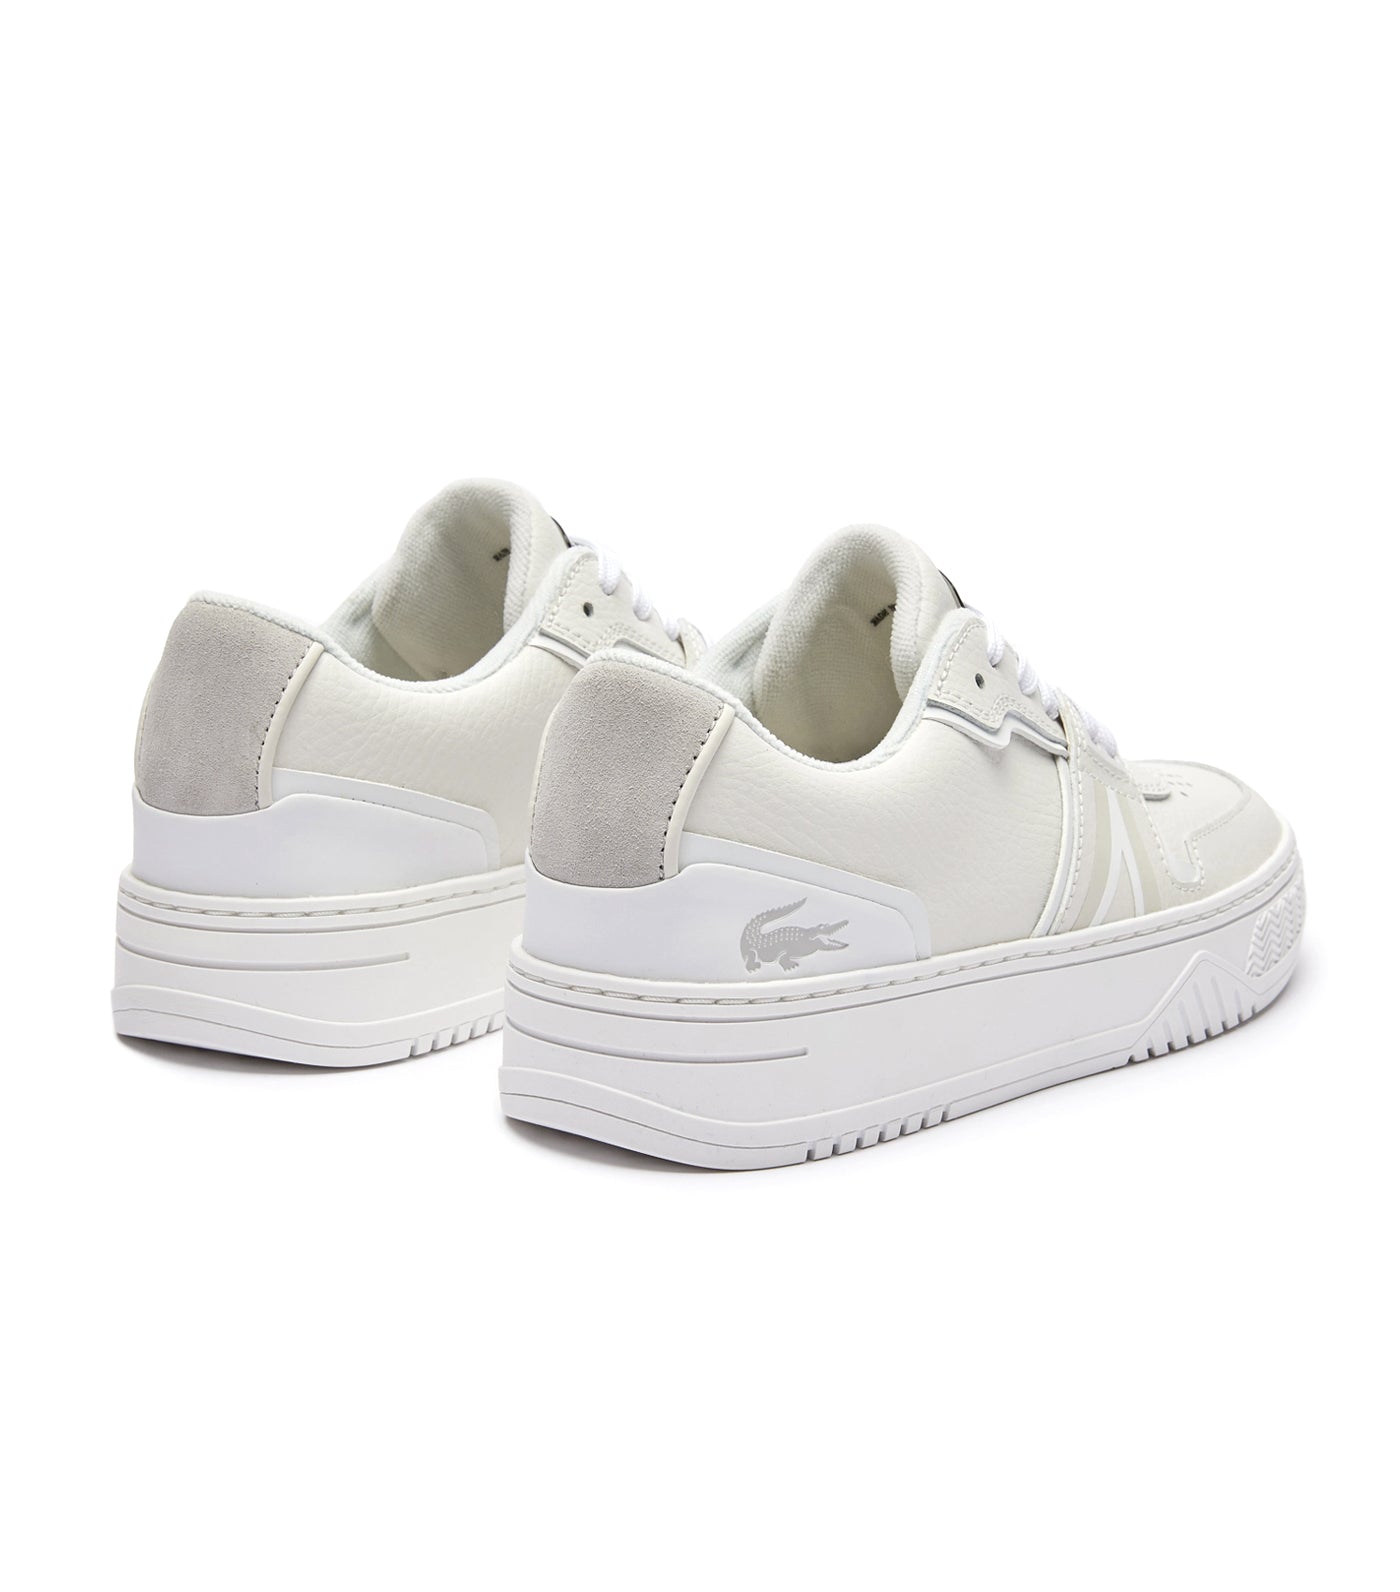 Men's L001 0321 1 Leather Sneakers White/Off White